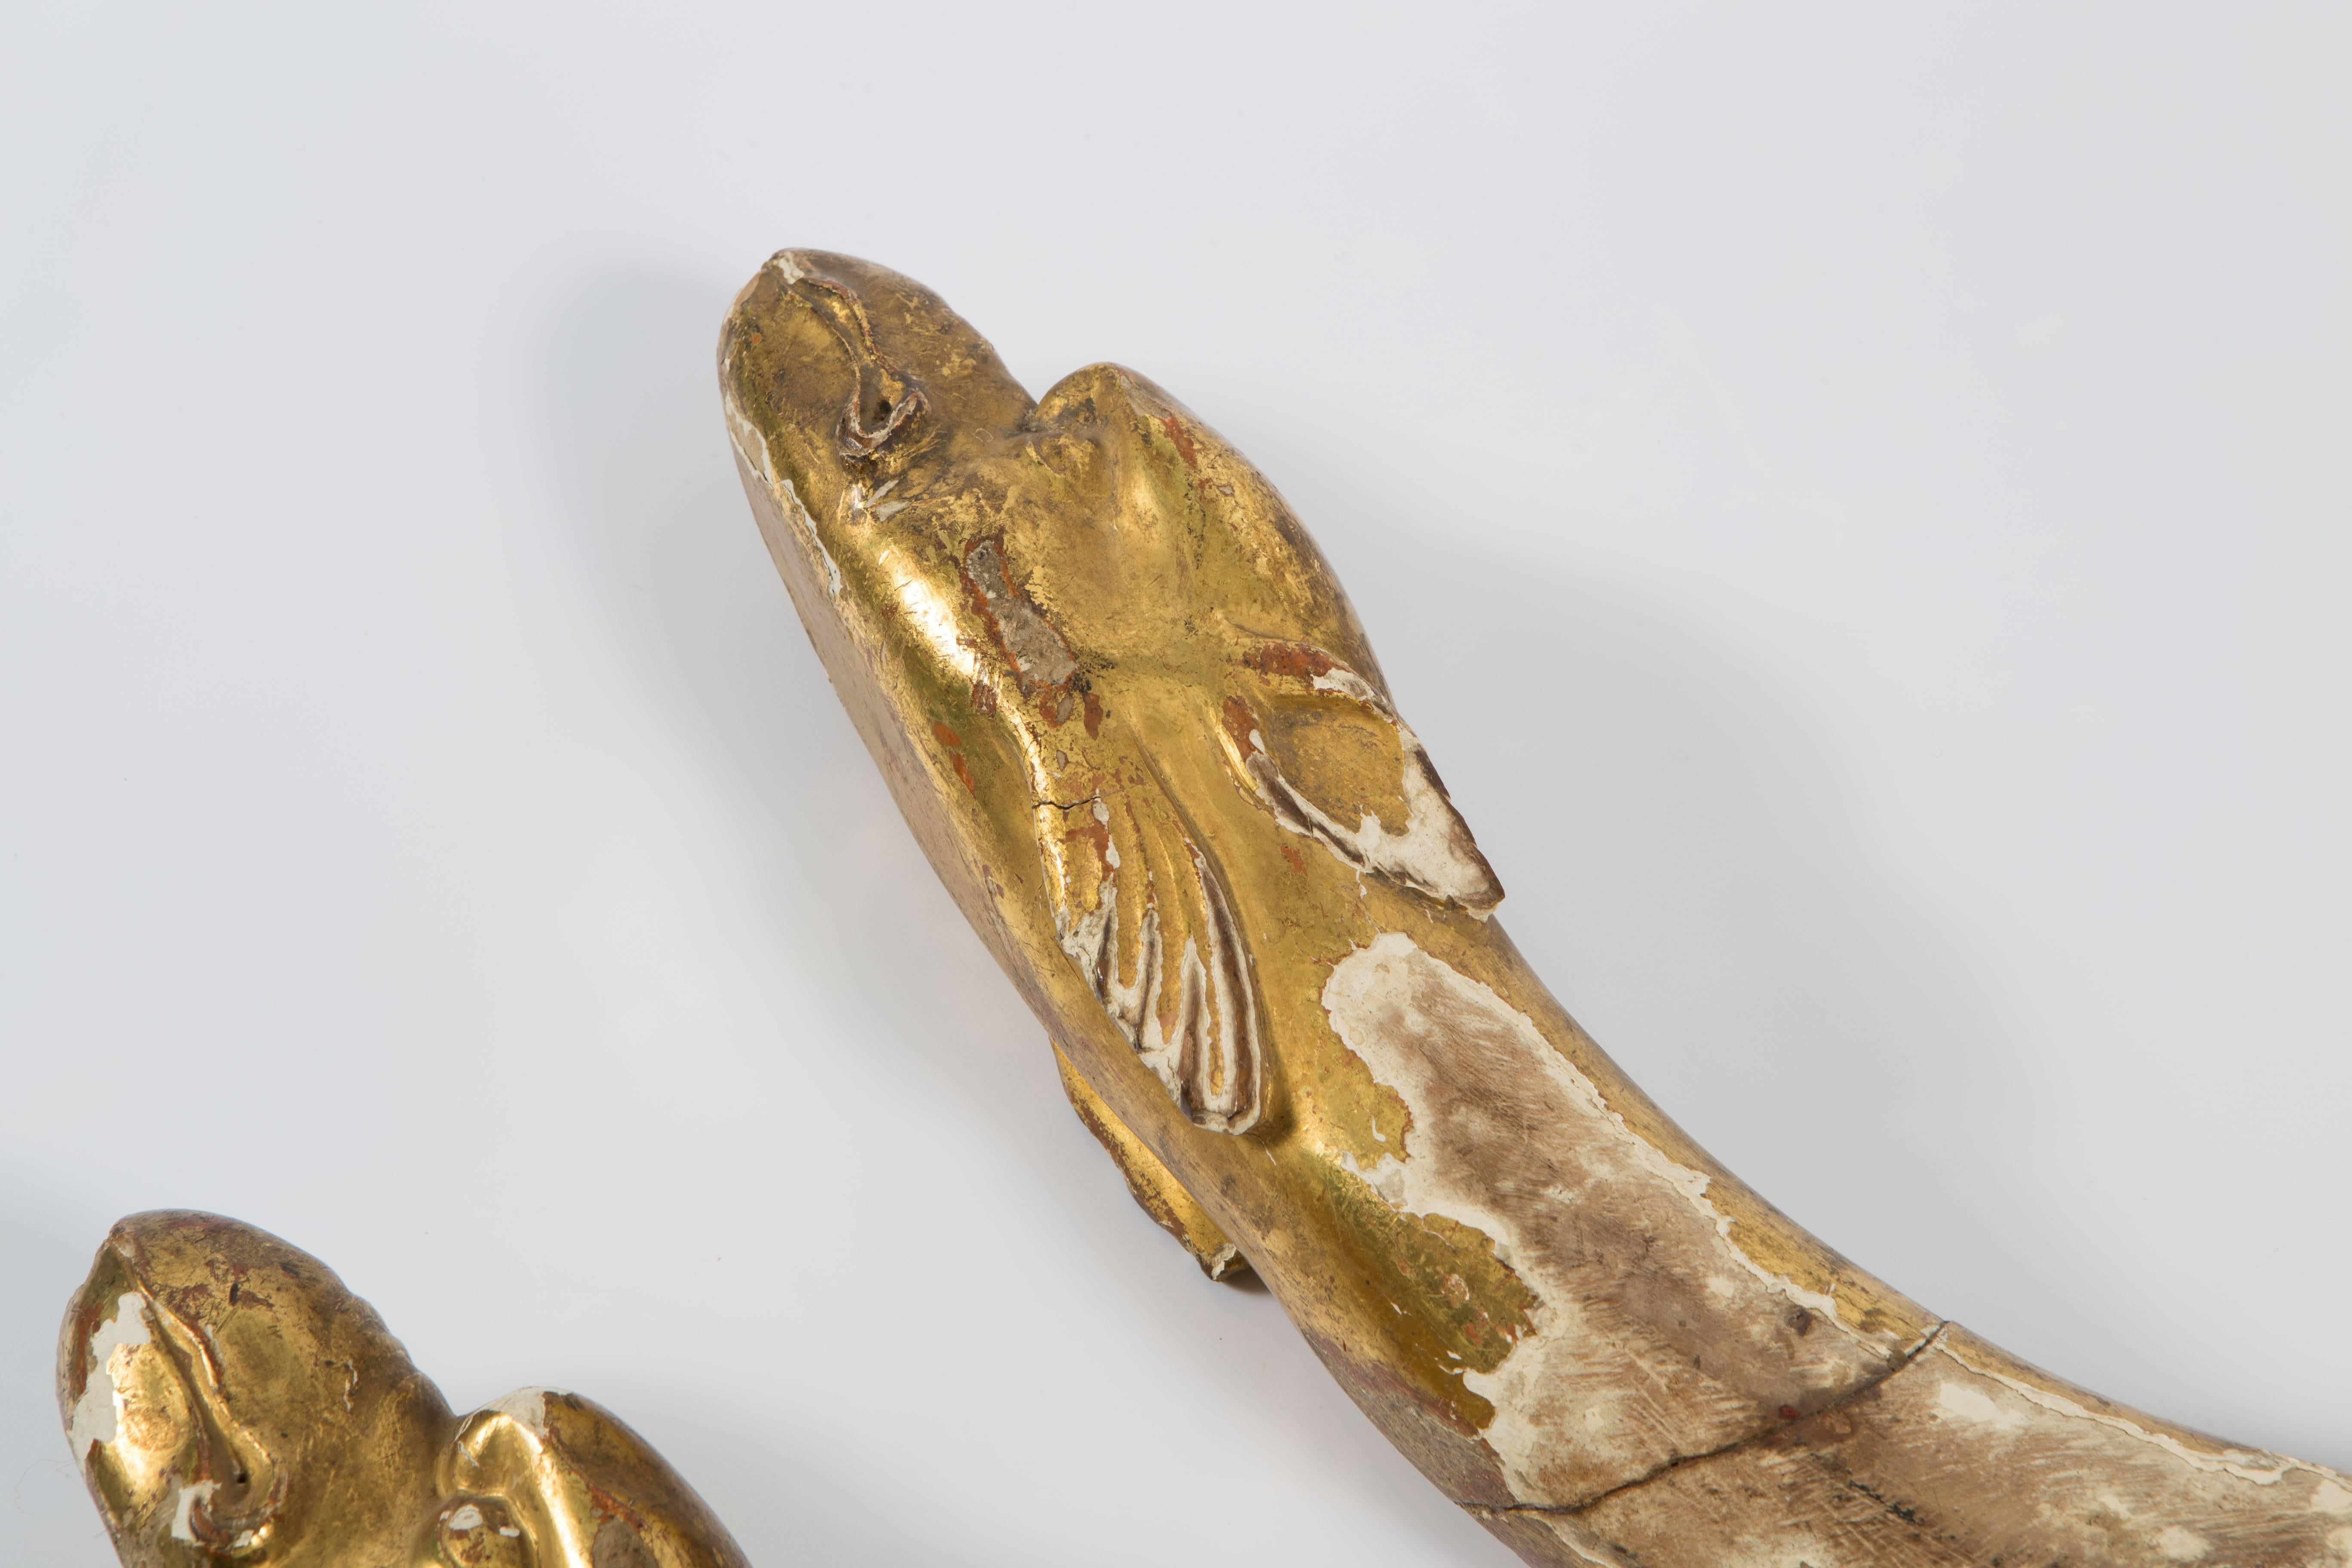 The is a pair of 18th century gold leaf dolphin shaped ornaments. They look interesting laying on a table for decoration or could be fixed for tiebacks for draperies.